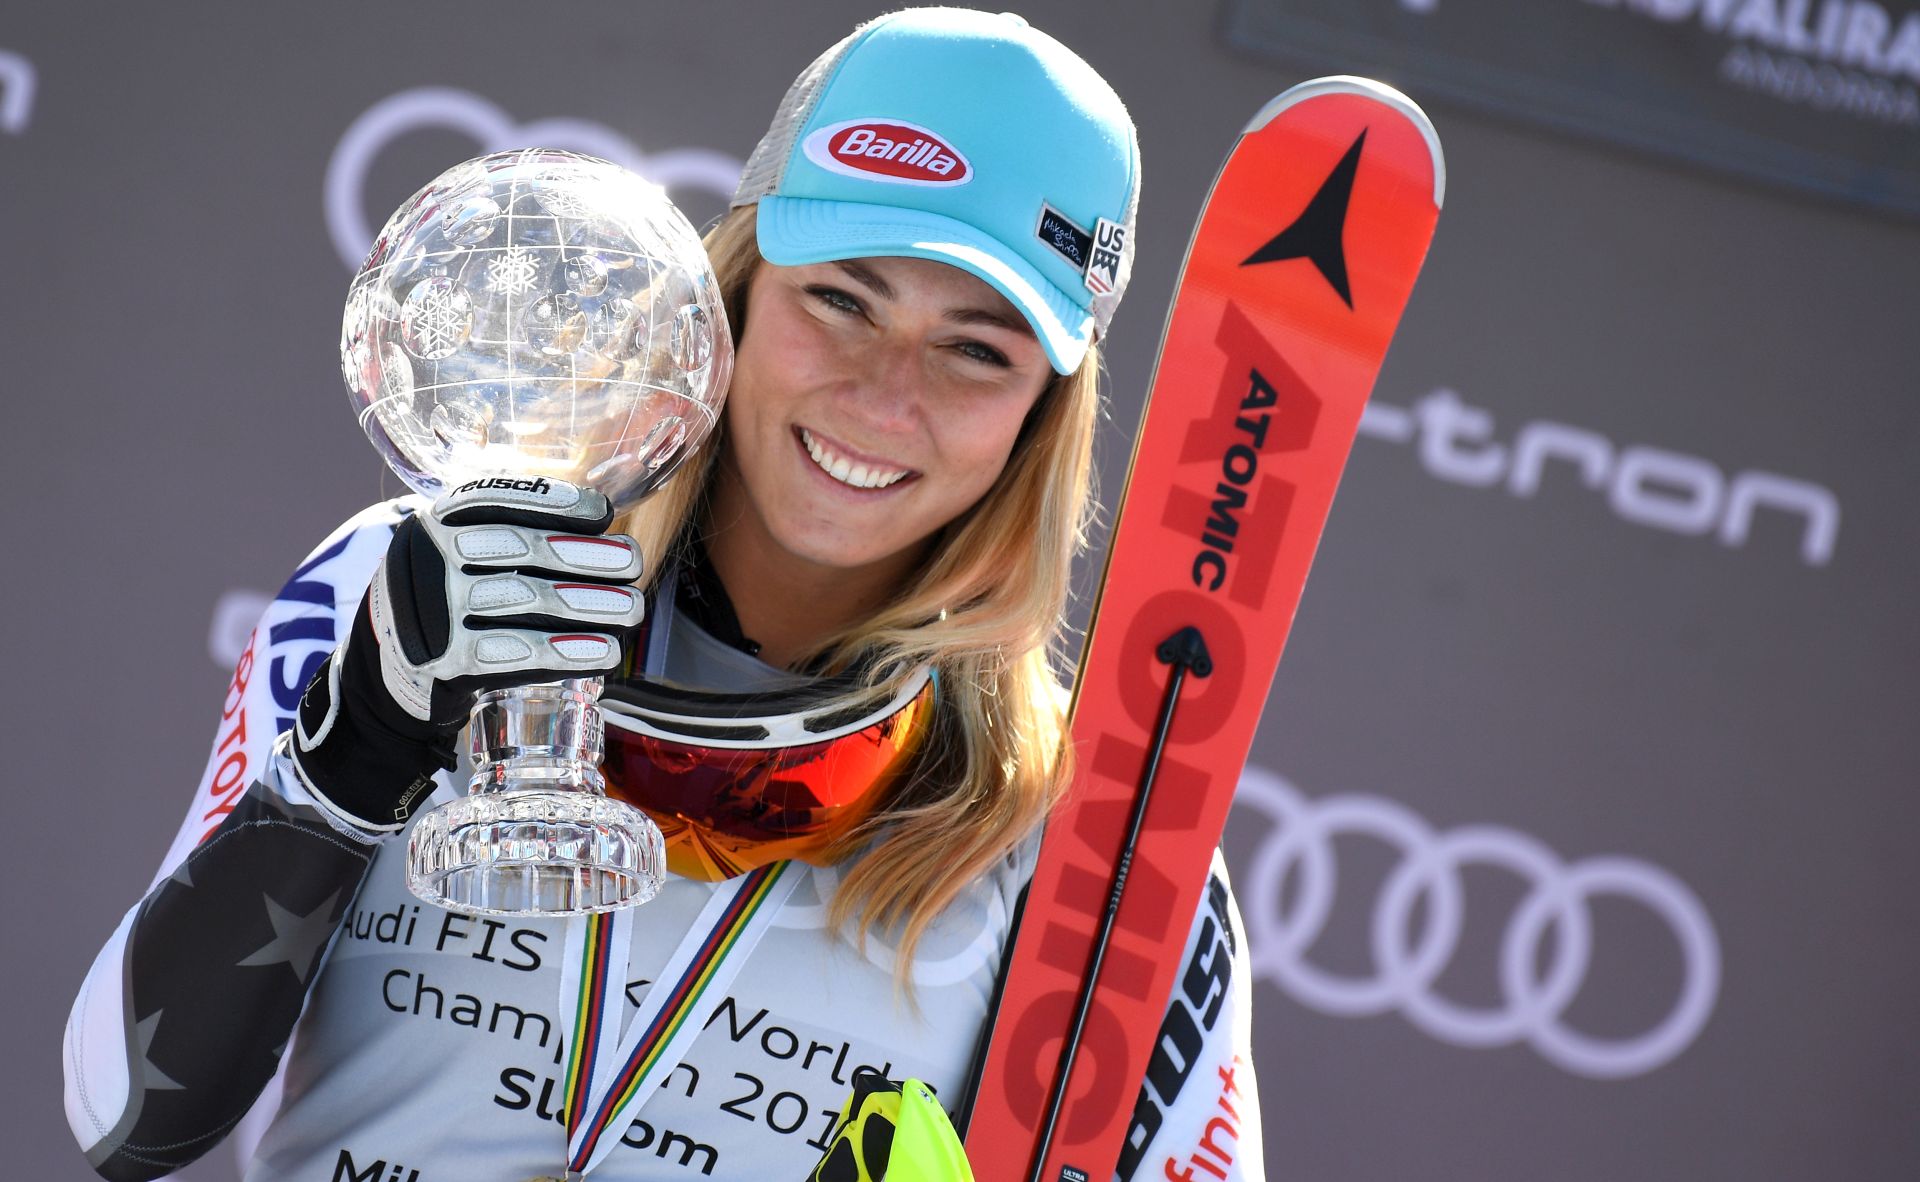 epa07442197 Mikaela Shiffrin of US celebrates on the podium  with her Women's Slalom World Cup trophy at the FIS Alpine Skiing World Cup finals in Soldeu - El Tarter, Andorra, 16 March 2019.  EPA/CHRISTIAN BRUNA